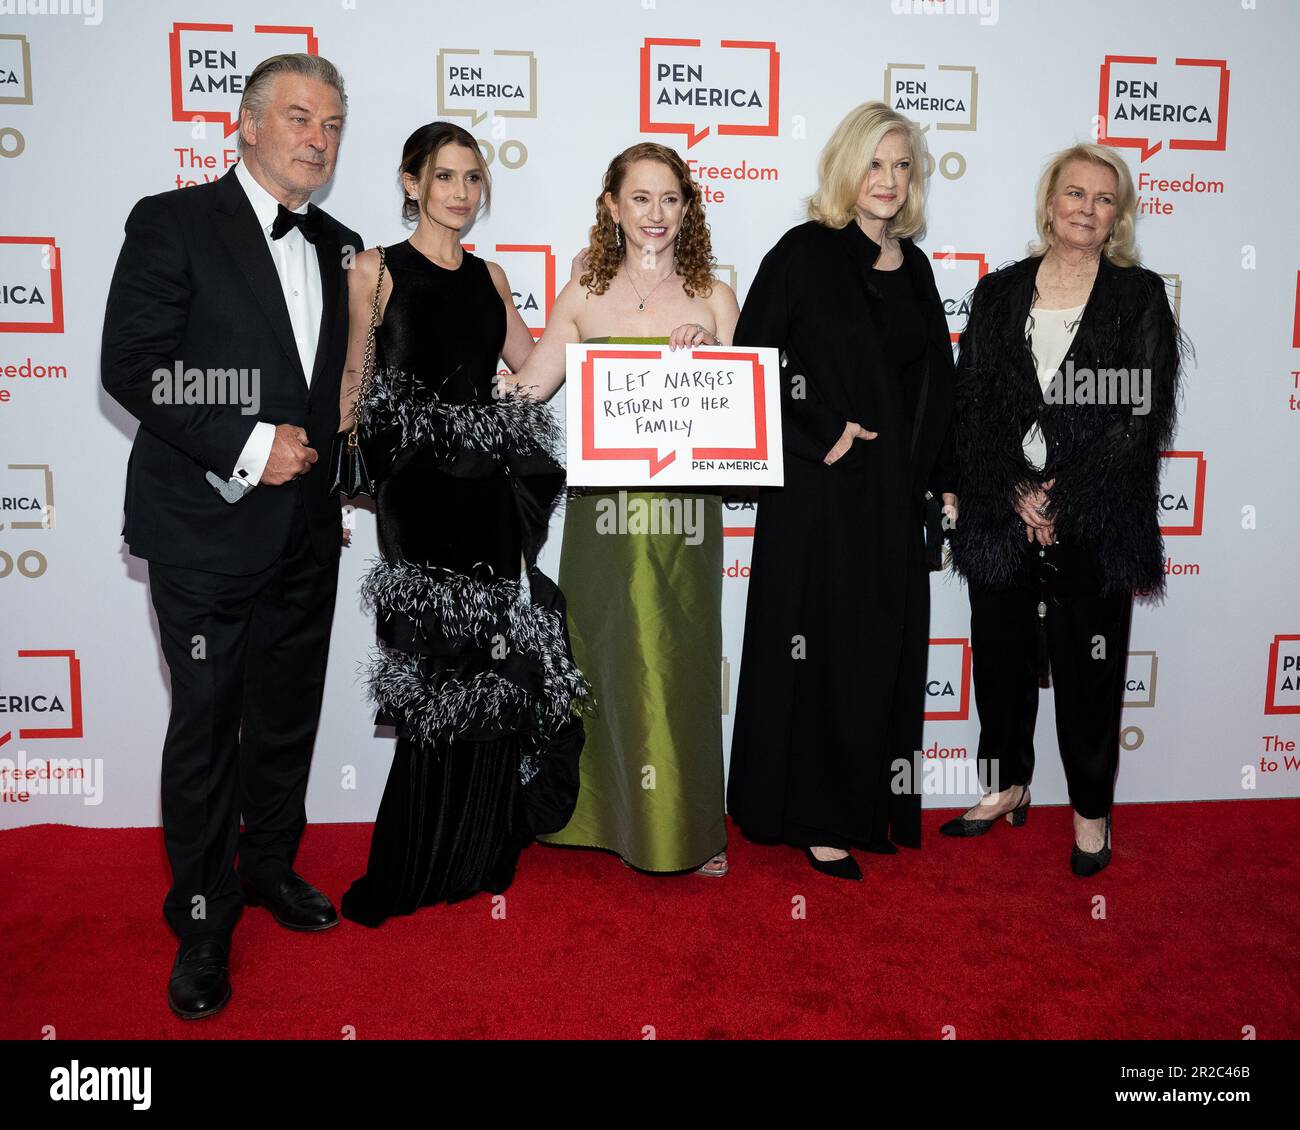 New York, USA. 18th May, 2023. (L-R) Alec Baldwin, Hilaria Baldwin, Suzanne Nossel, Diane Sawyer, and Candice Bergen arrive on the red carpet for the 2023 PEN America Literary Gala at The Museum of Natural History in New York, New York, on May 18, 2023. (Photo by Gabriele Holtermann/Sipa USA) Credit: Sipa USA/Alamy Live News Stock Photo